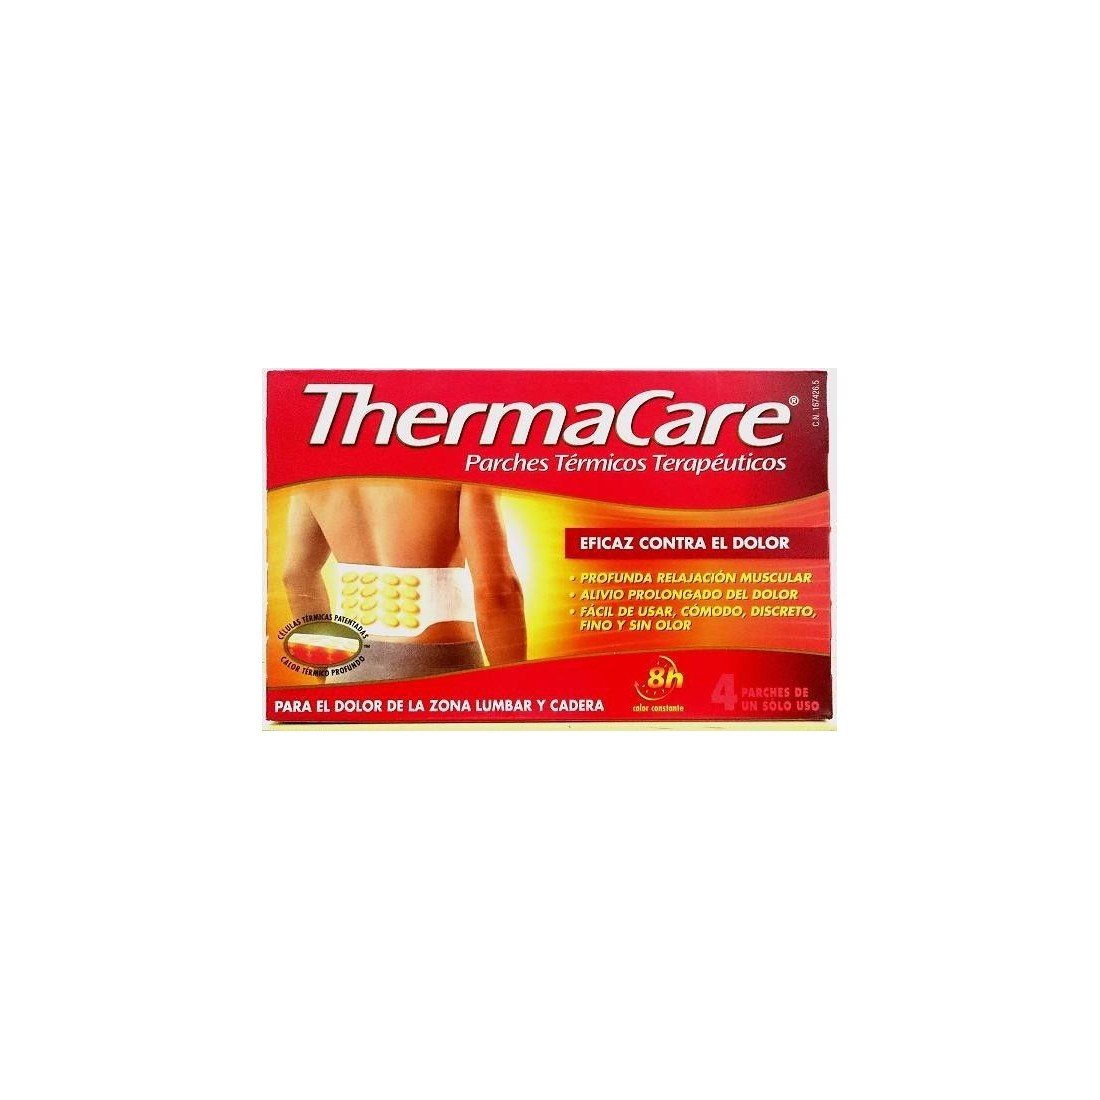 ThermaCare Zona Lumbar y Cadera, 4 Parches Térmicos